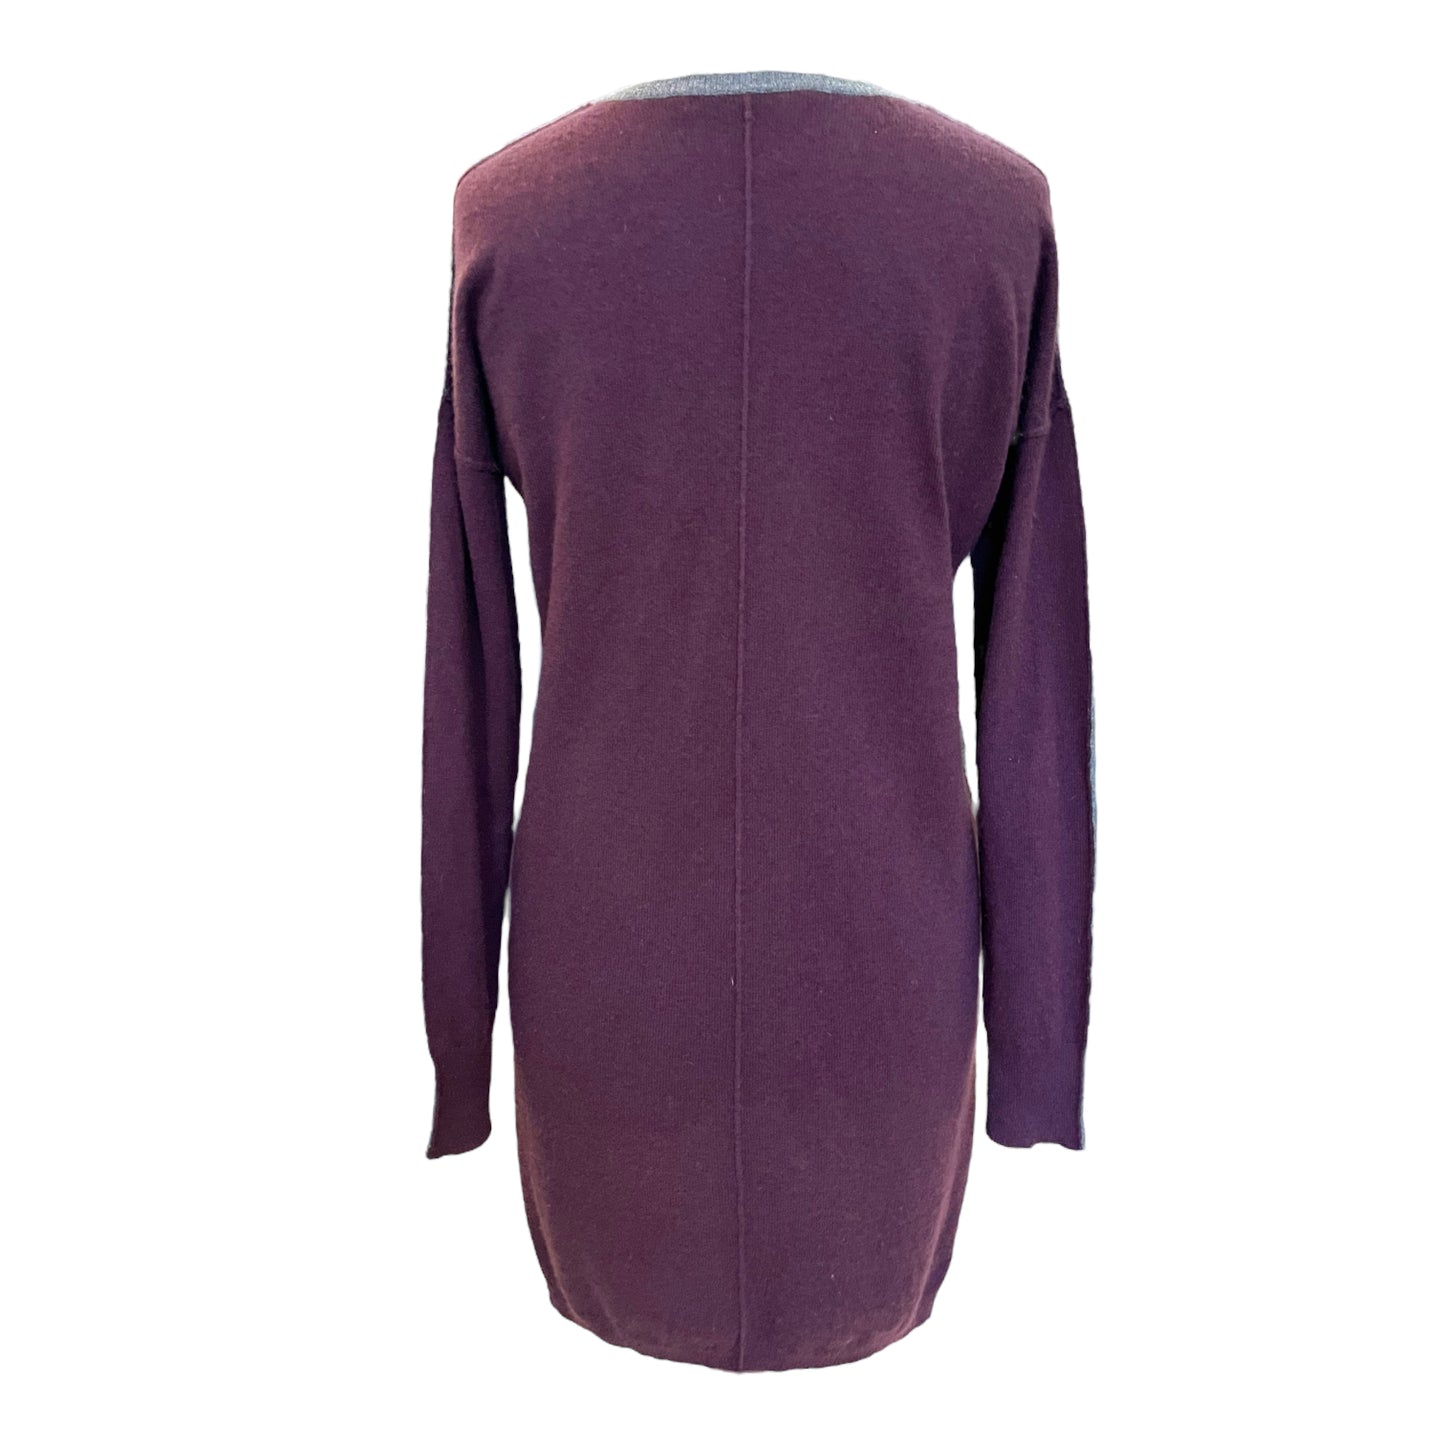 360 Cashmere Grey and Purple Jumper